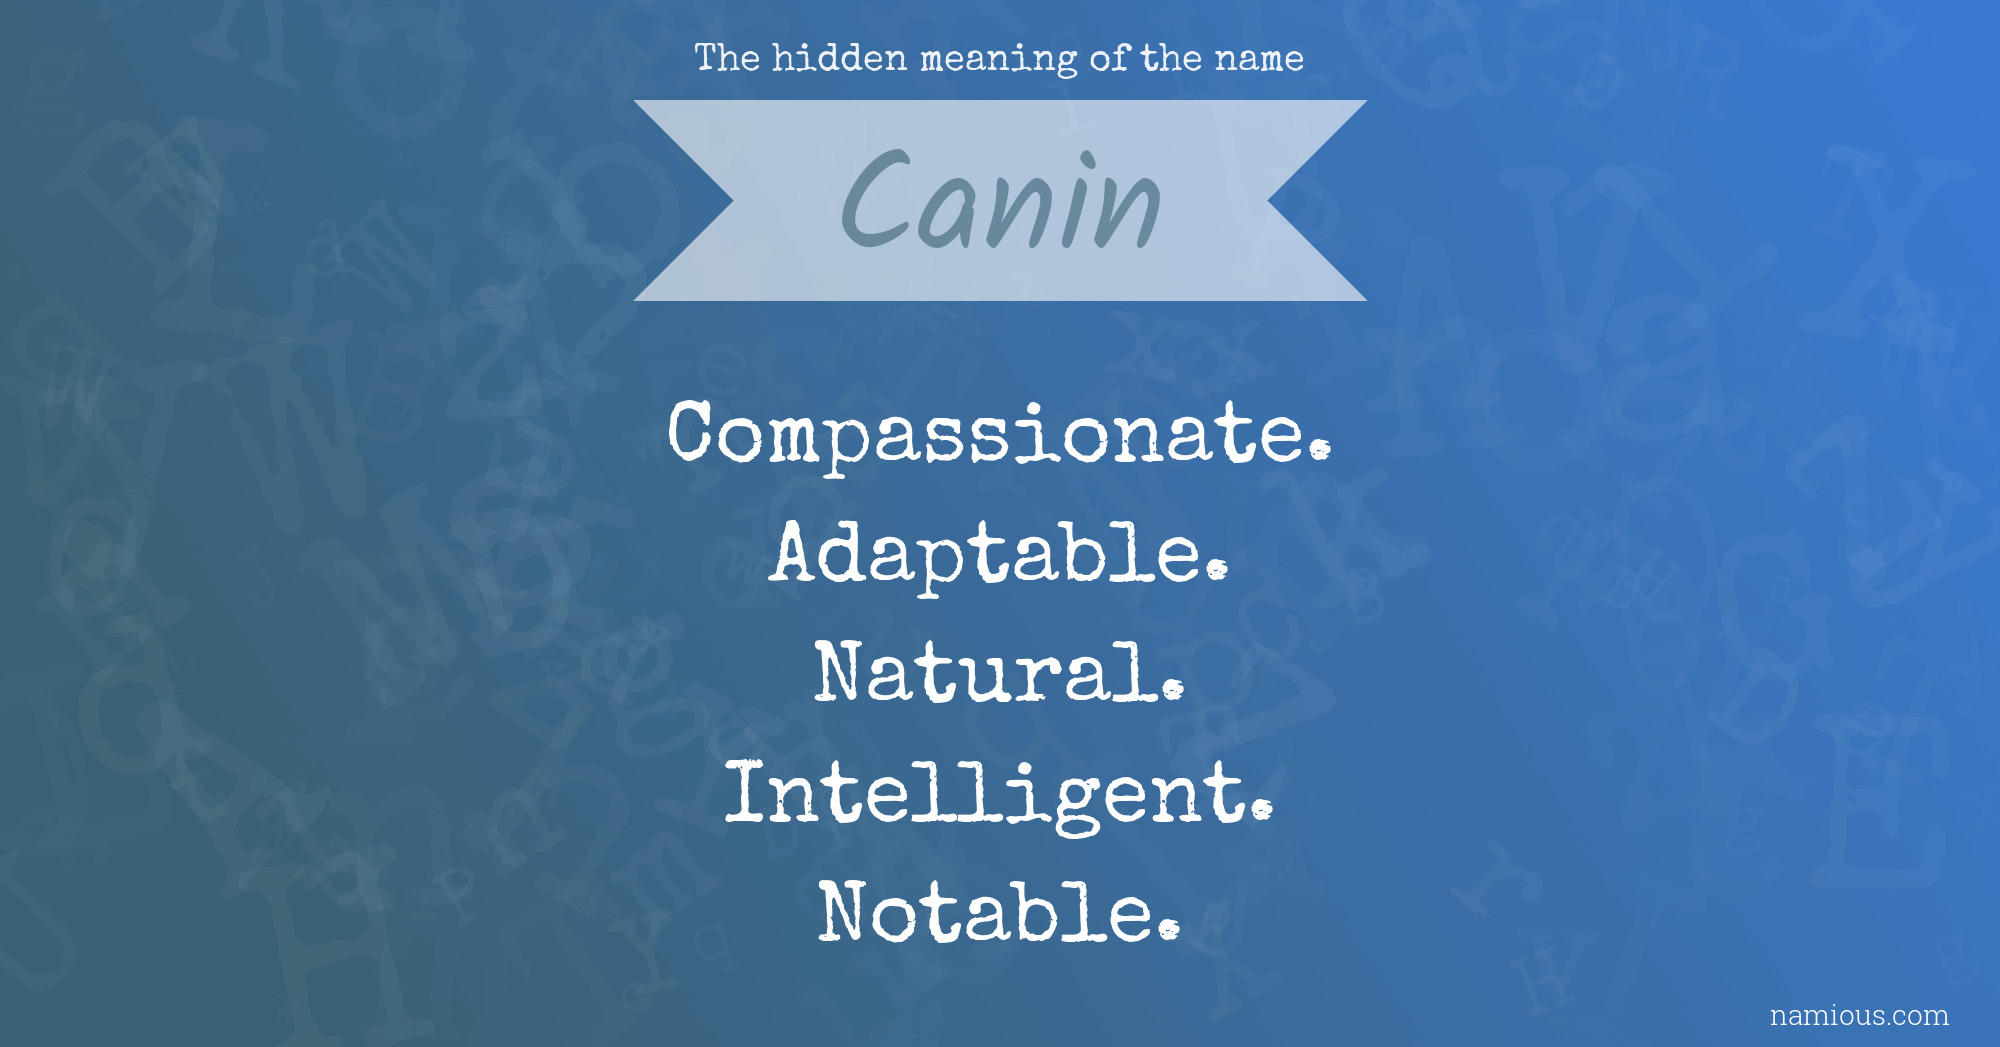 The hidden meaning of the name Canin